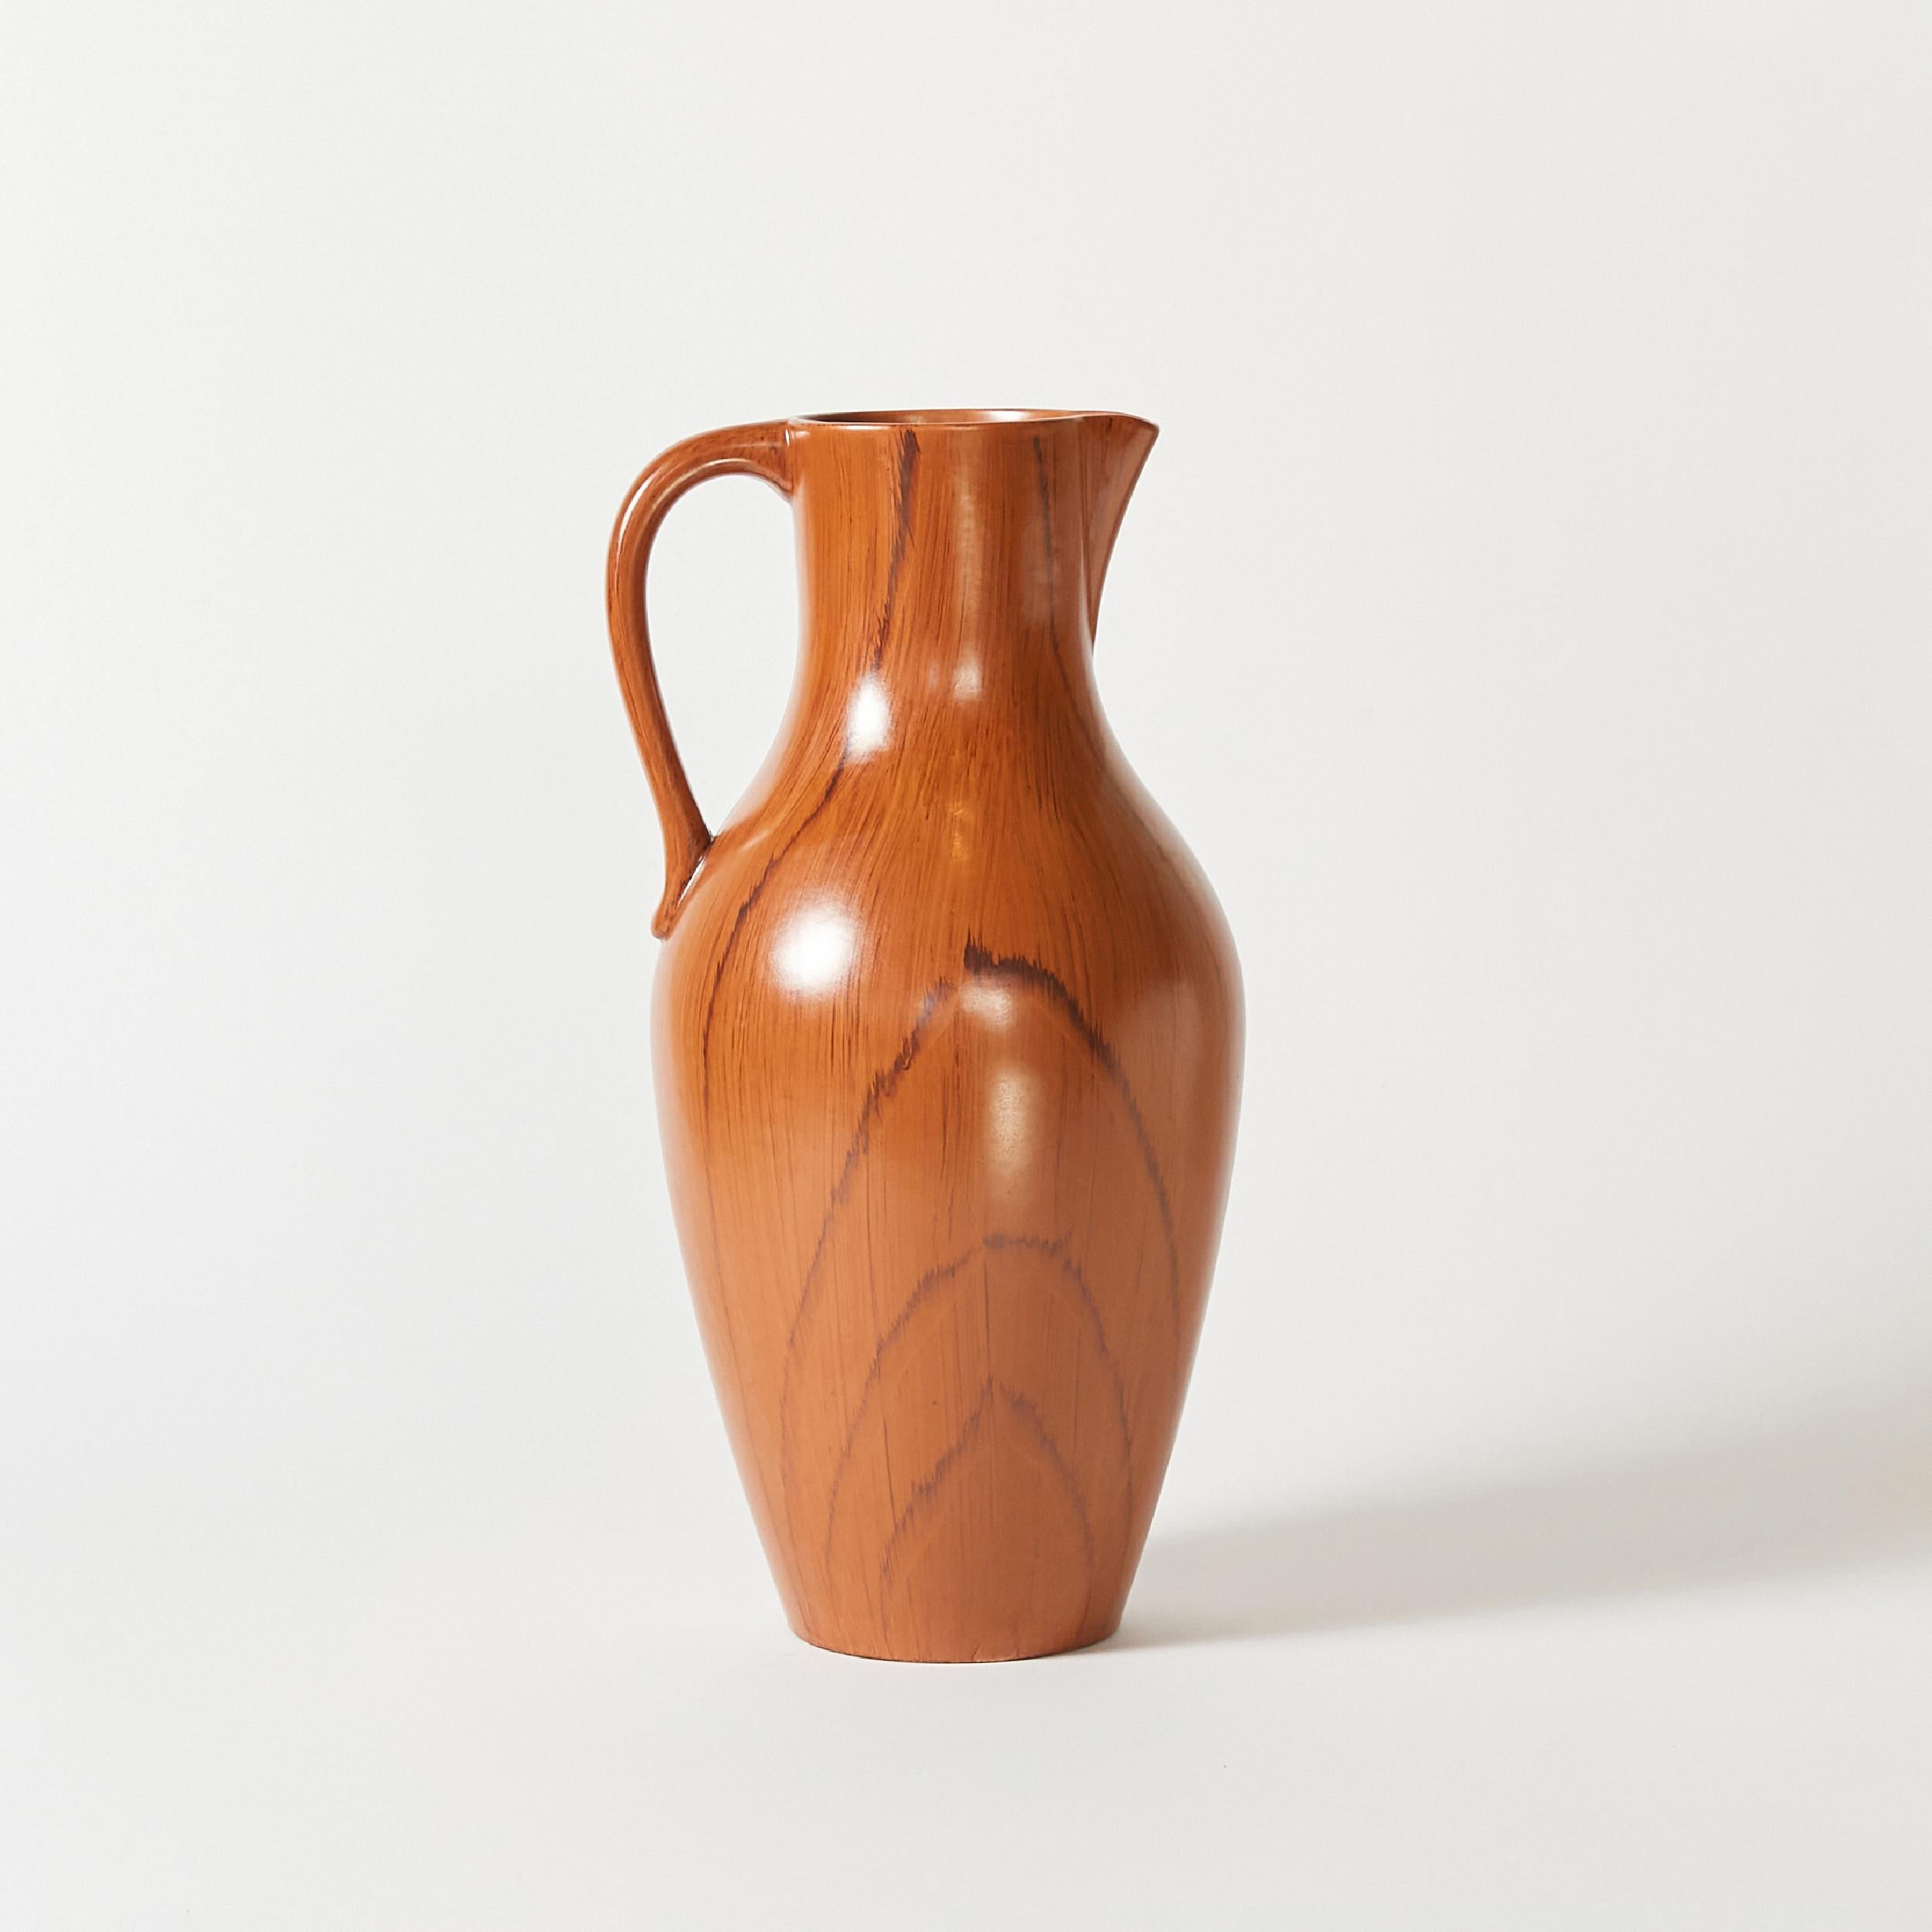 A Gräfenroda Keramik extra large ceramic pitcher. Originally hand finished in faux wood pattern with satin glaze.
Made in Germany in 1950s.
Labeled.